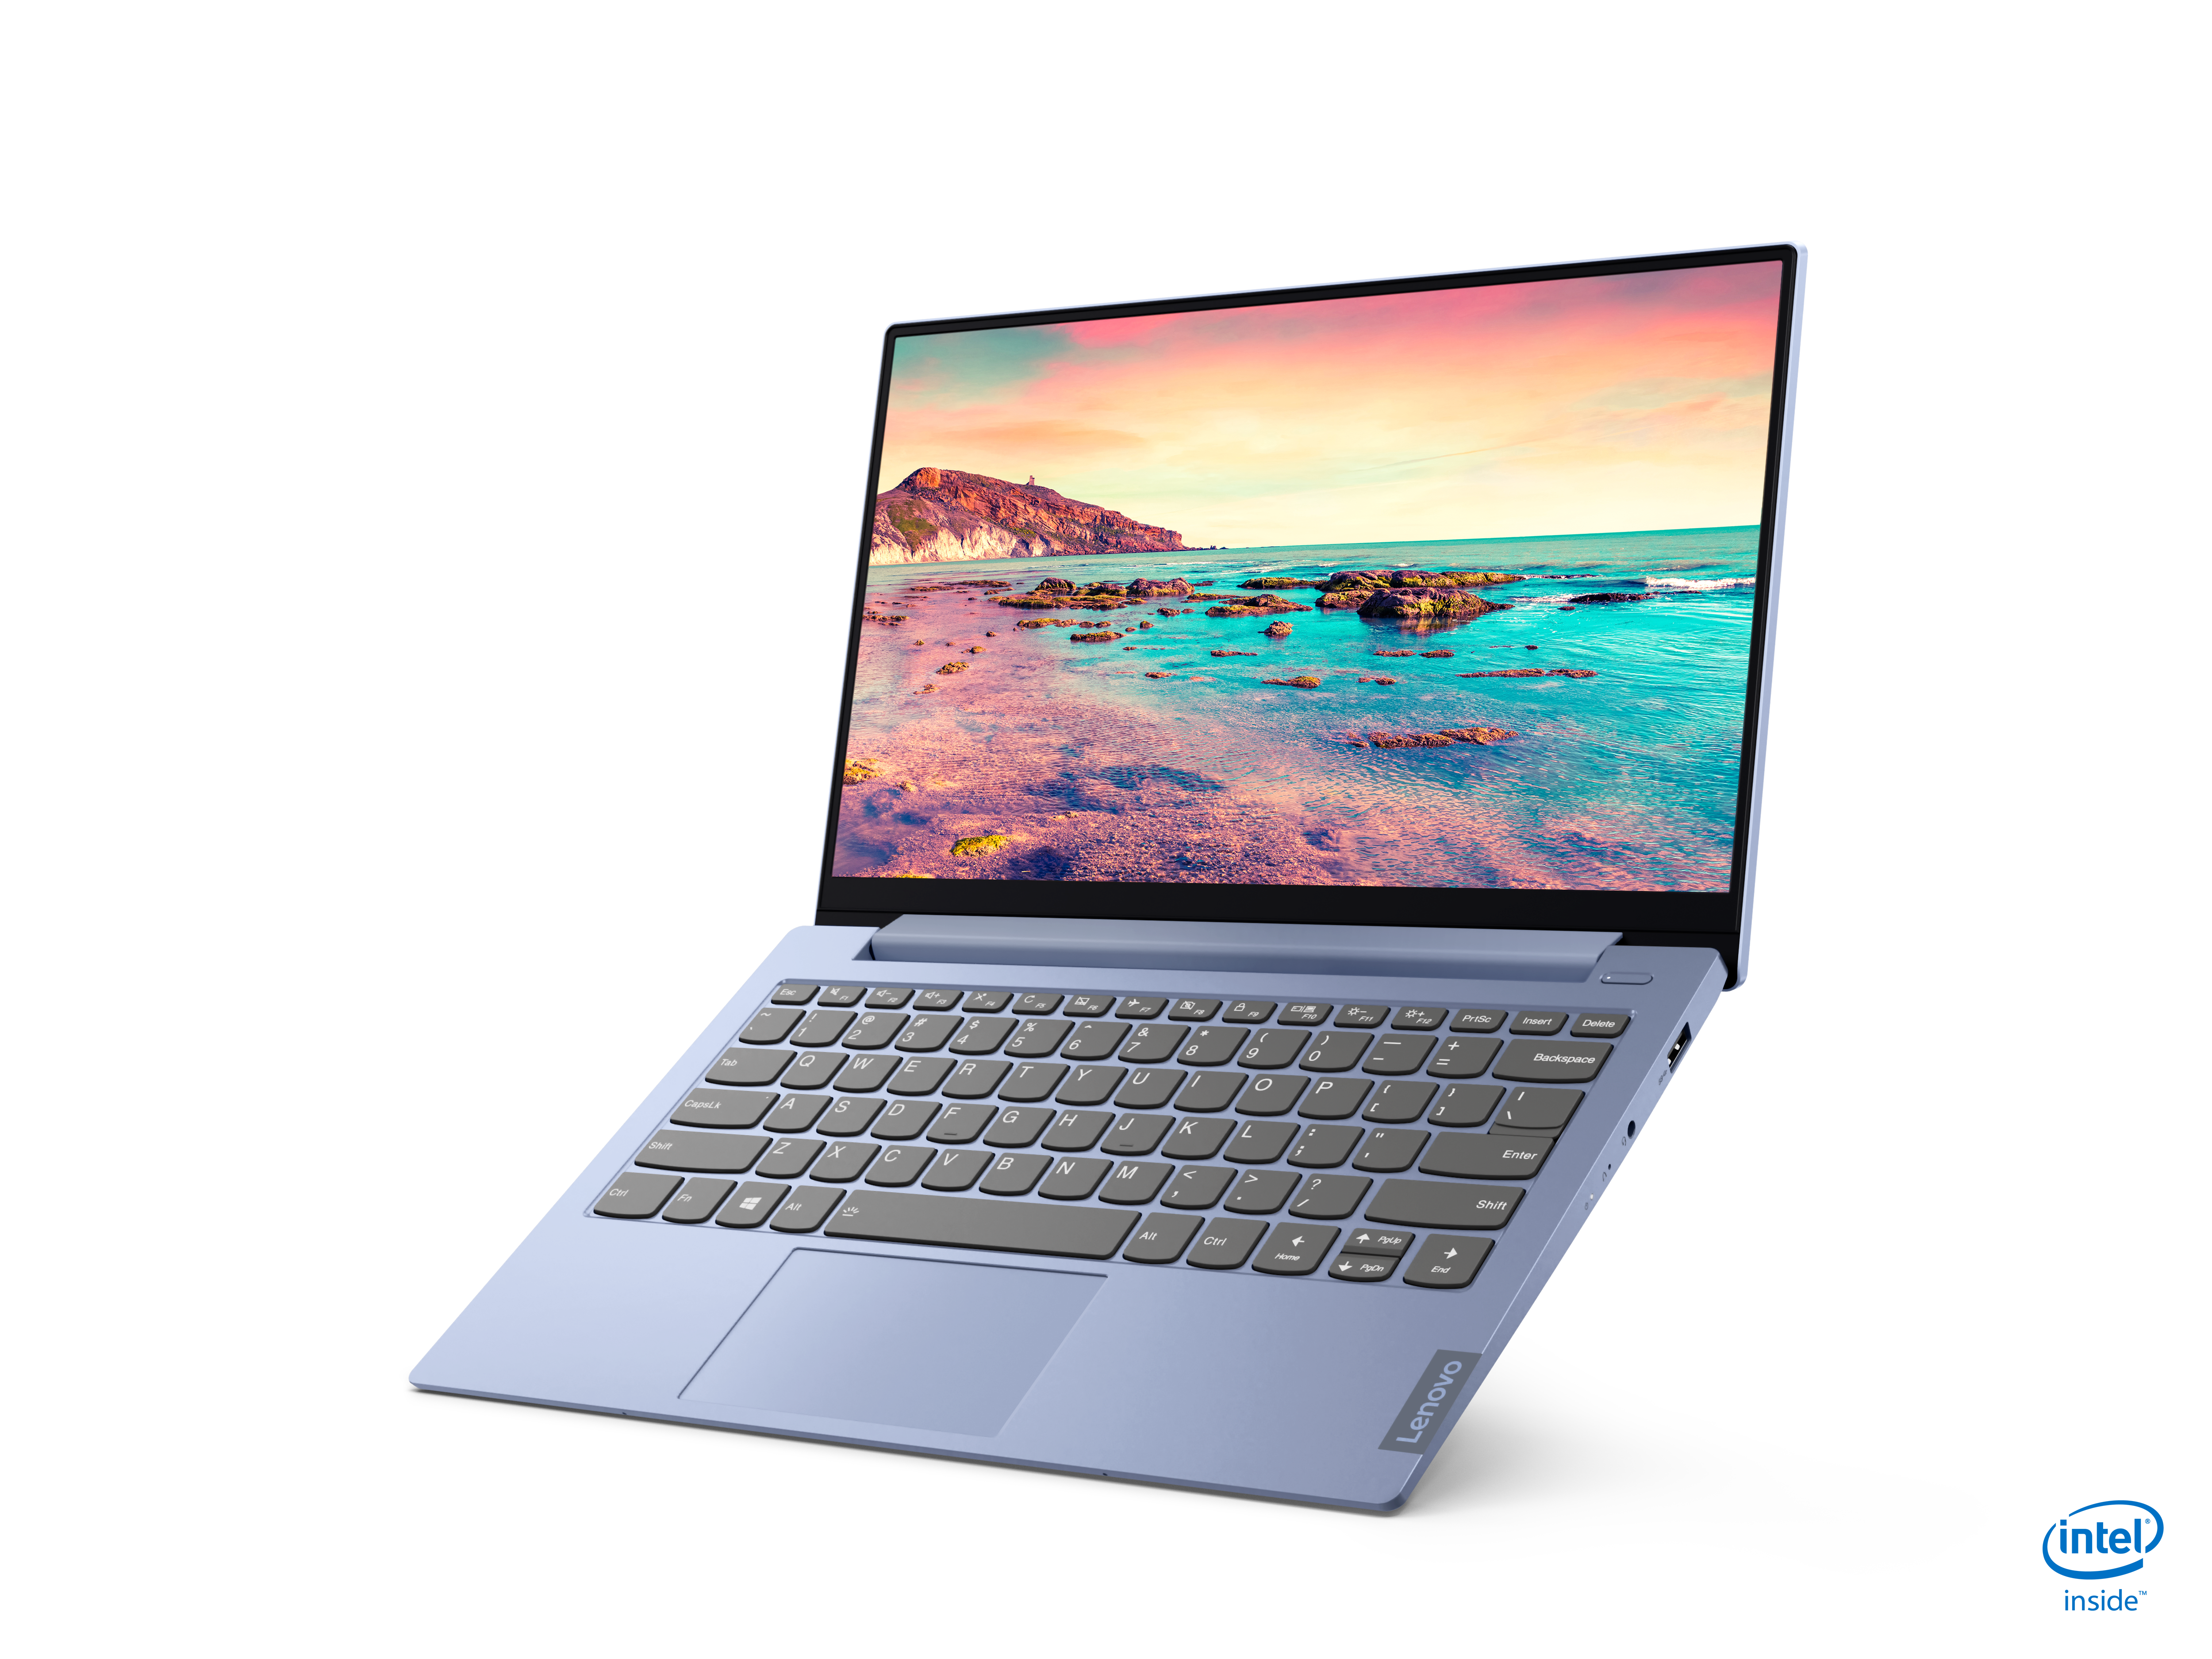 Lenovo Announces Refreshed Ideapad S340 13 Inch With Intel Comet Lake And Nvidia Mx250 Options Notebookcheck Net News